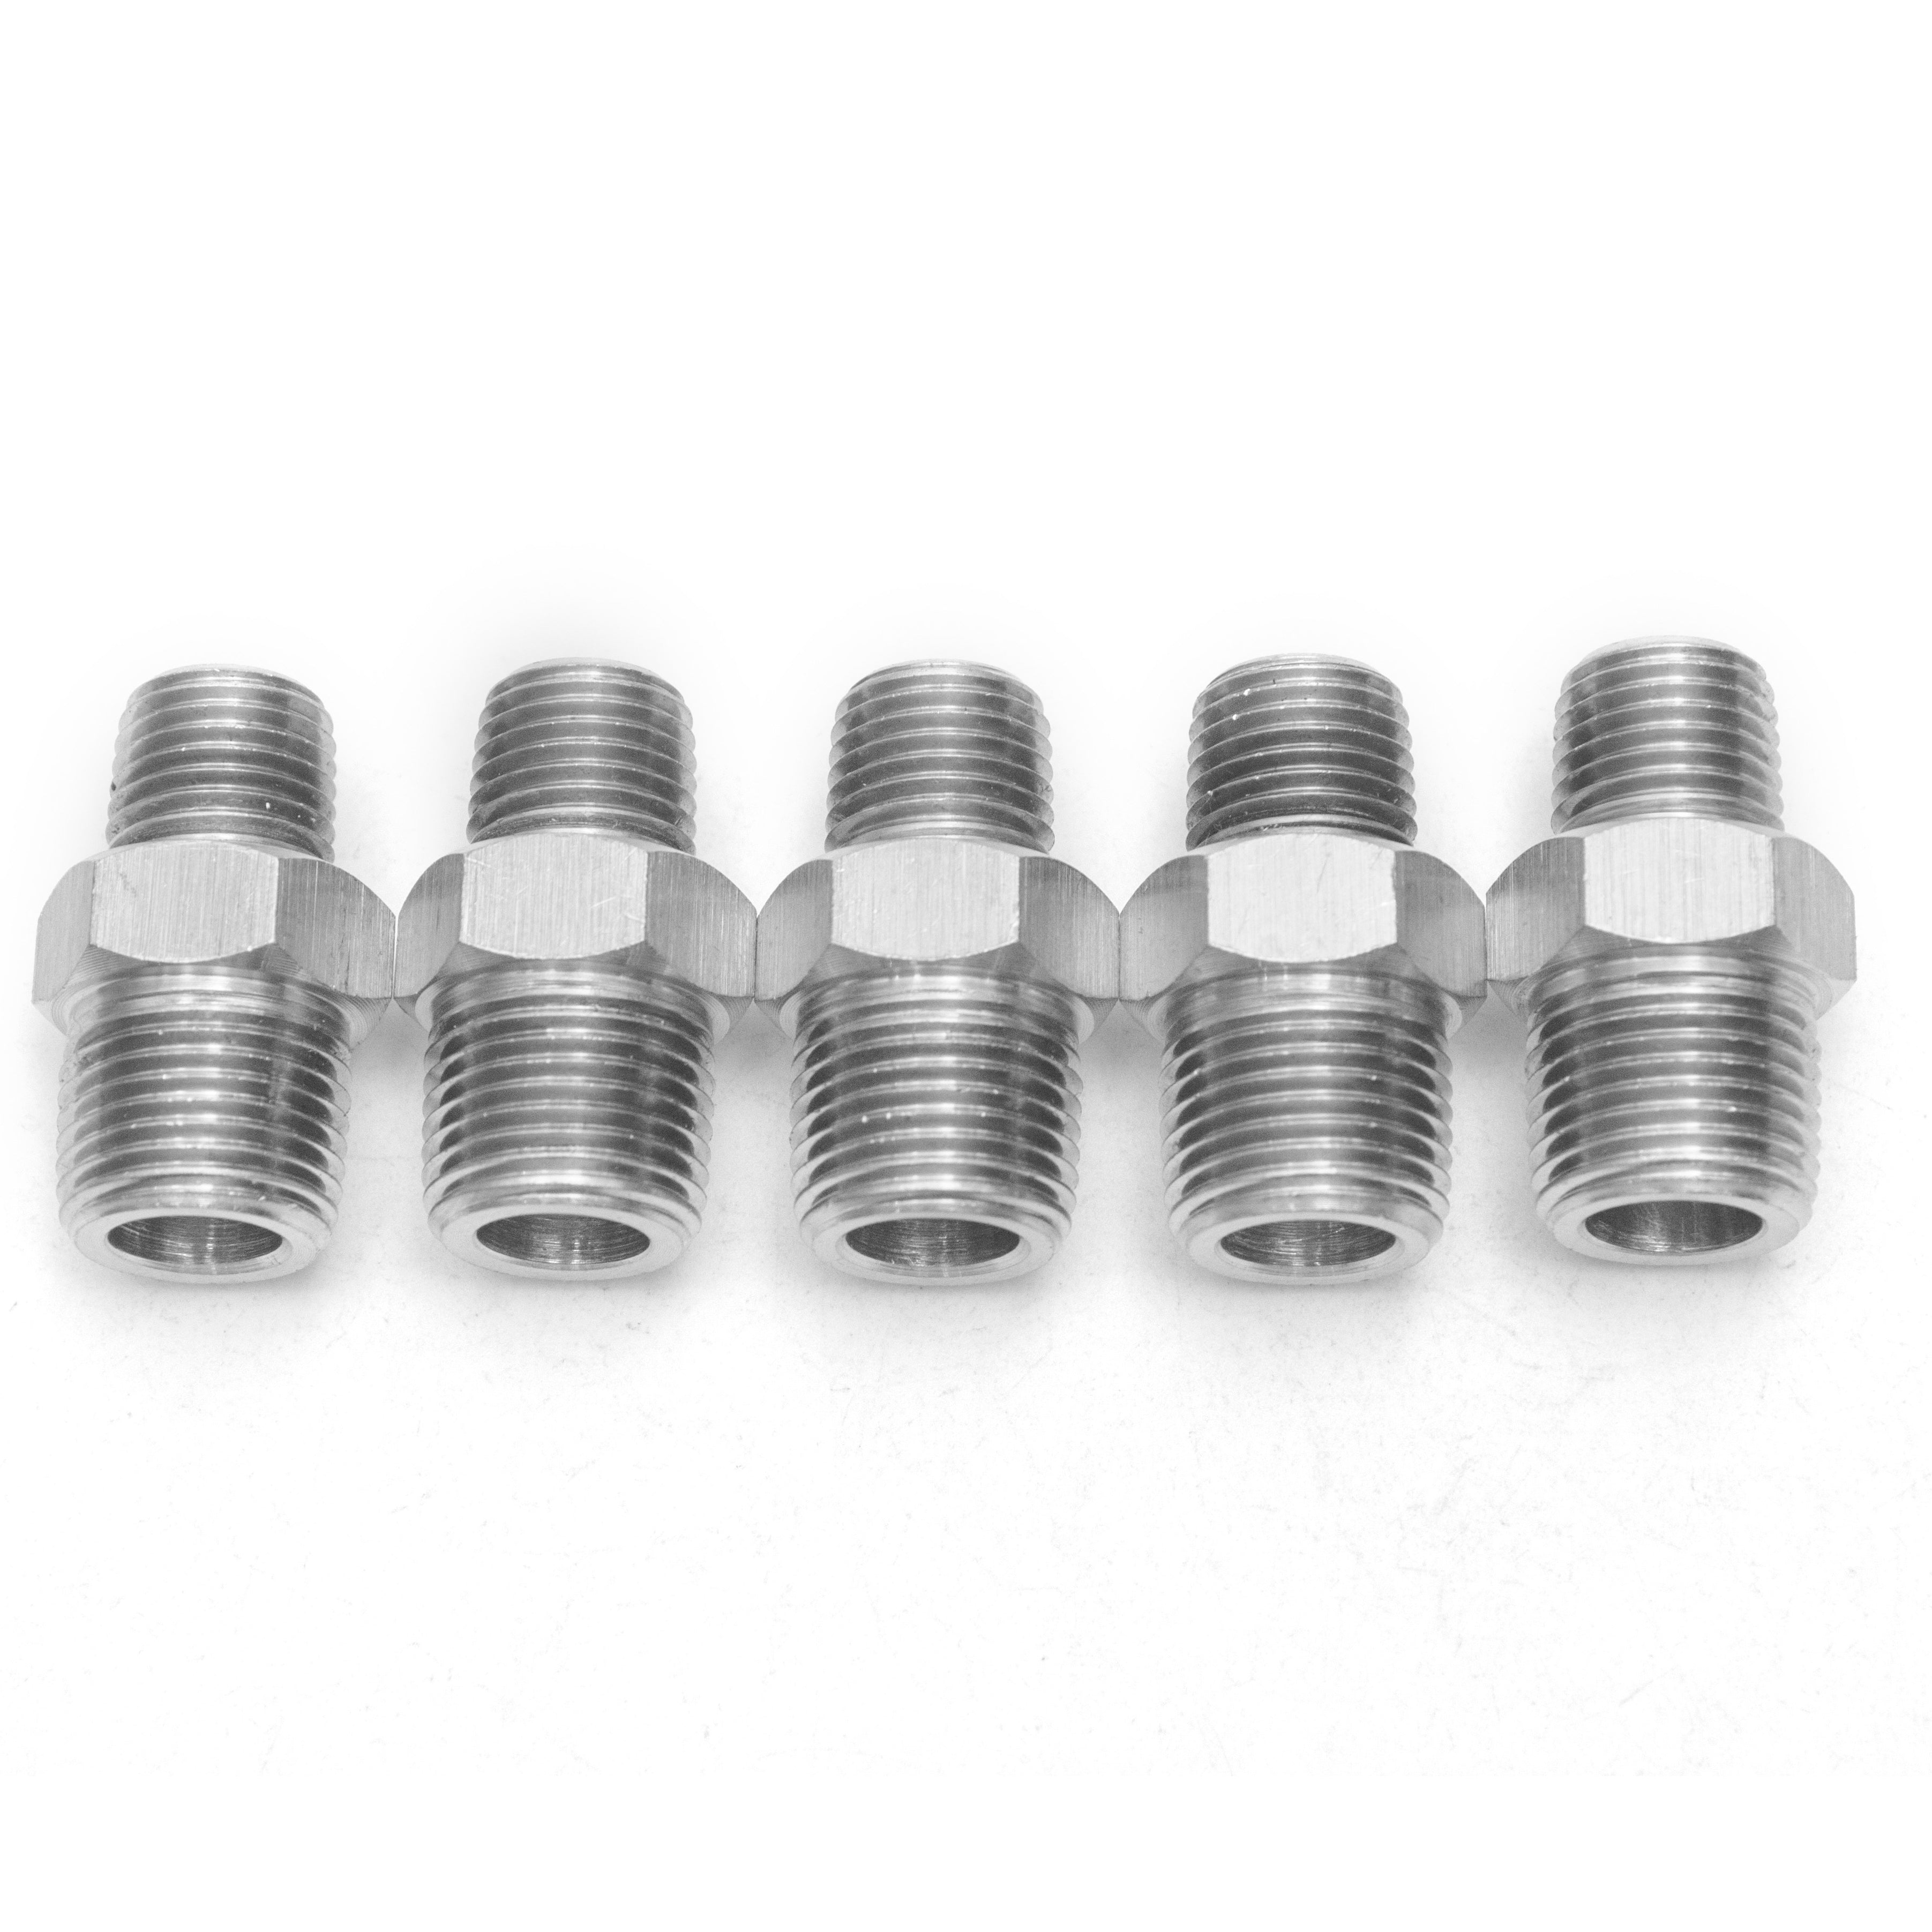 LTWFITTING Stainless Steel 316 Pipe Hex Reducing Nipple Fitting 3/8-Inch x 1/4-Inch Male BSPT (Pack of 5)